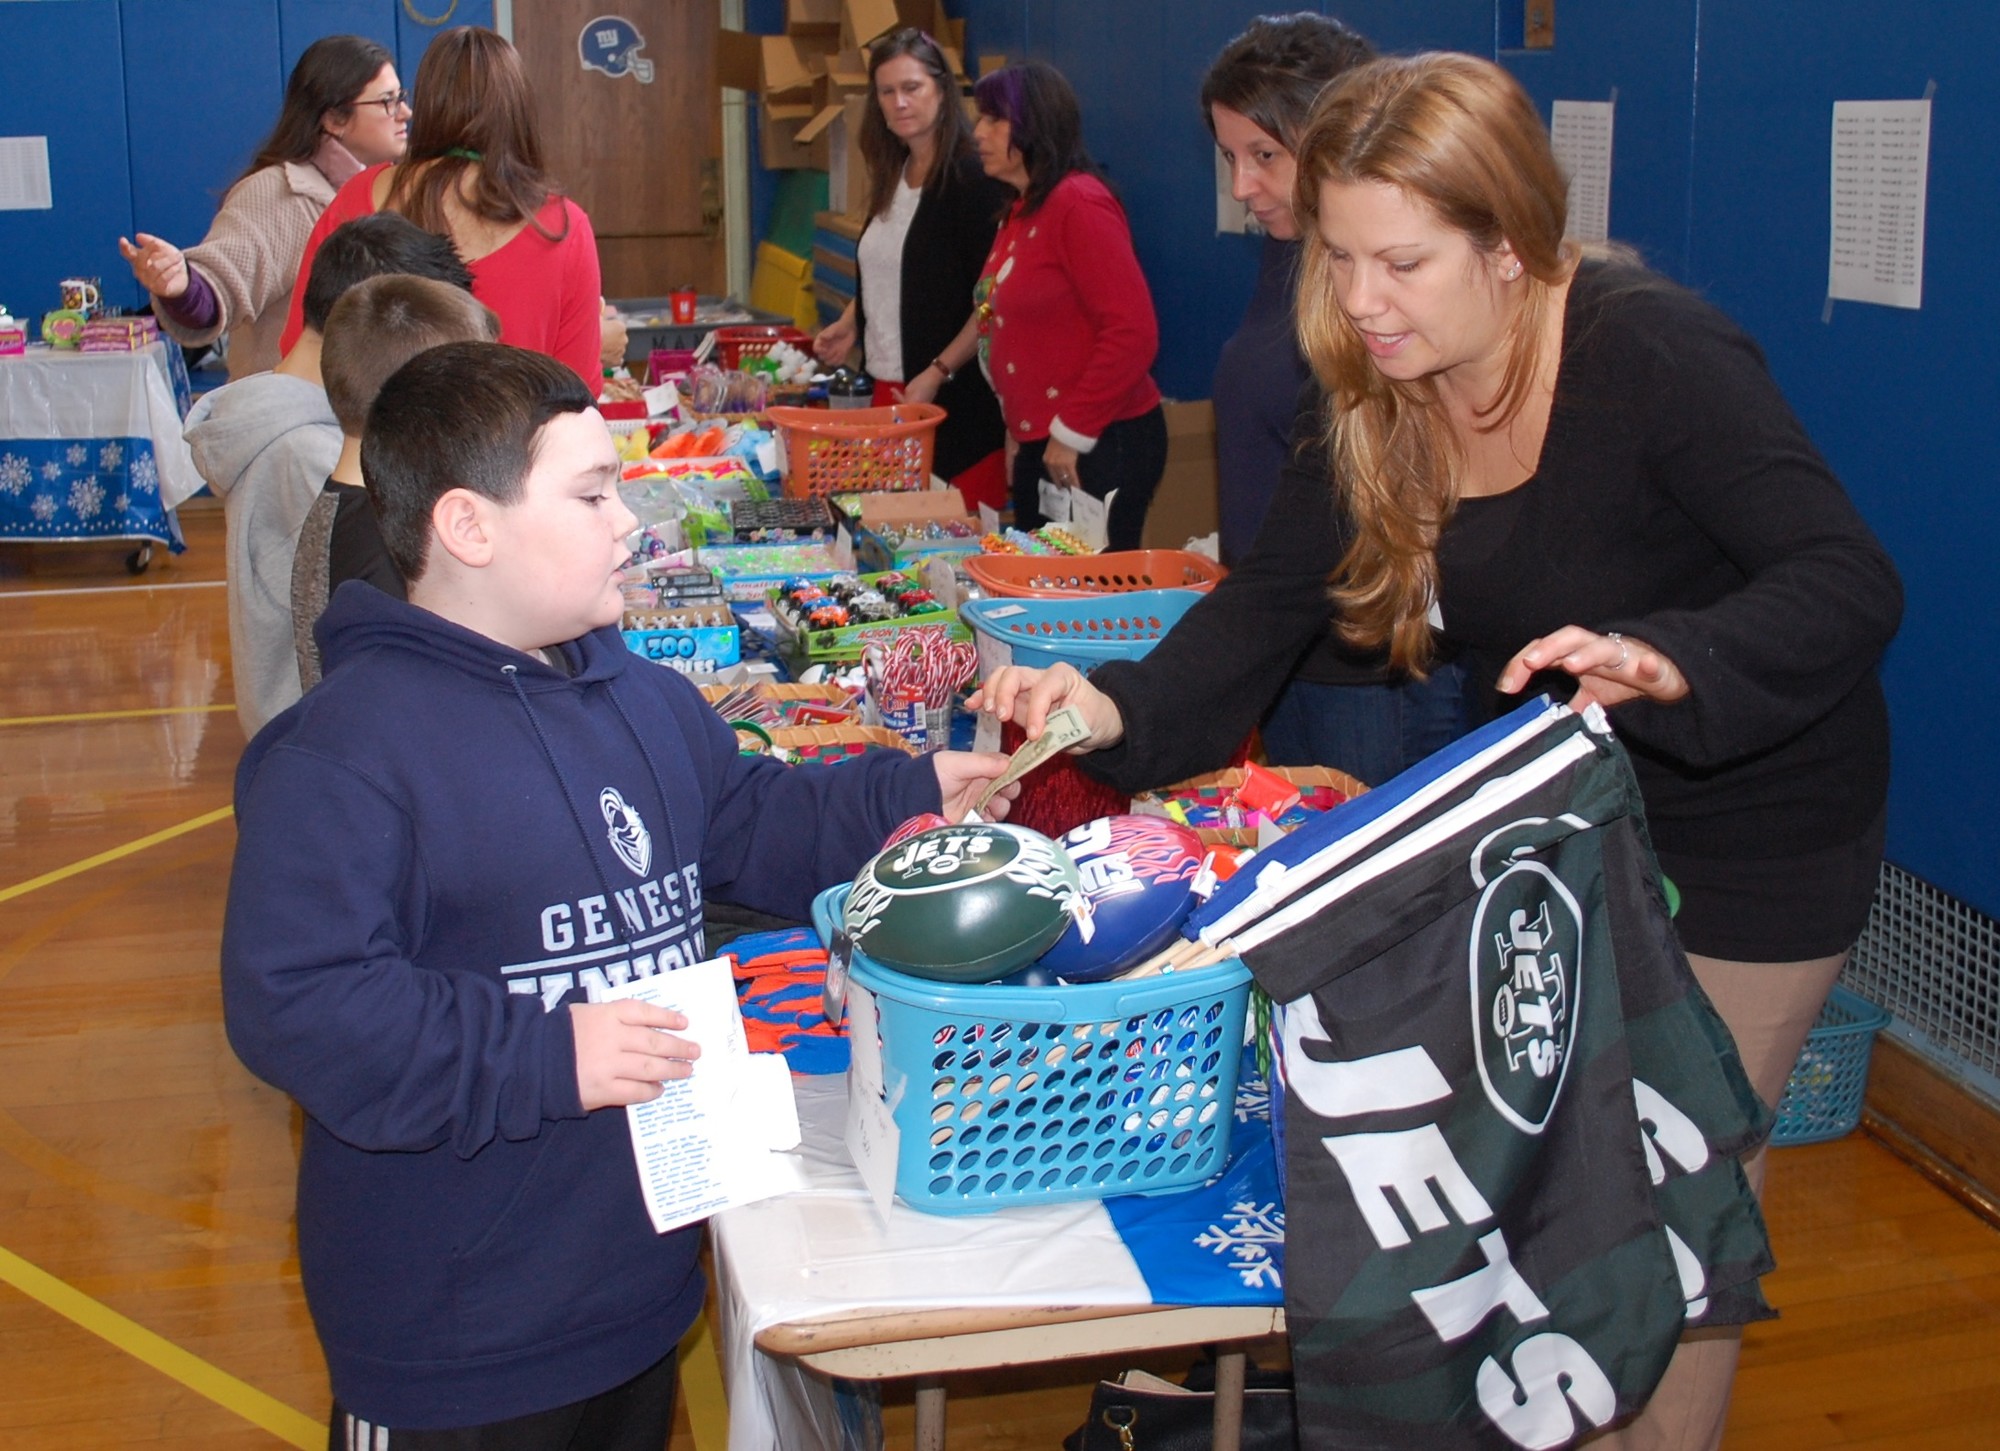 Seaford Manor School students could do their holiday shopping last week when part of the gymnasium was transformed into Snowflake Village.